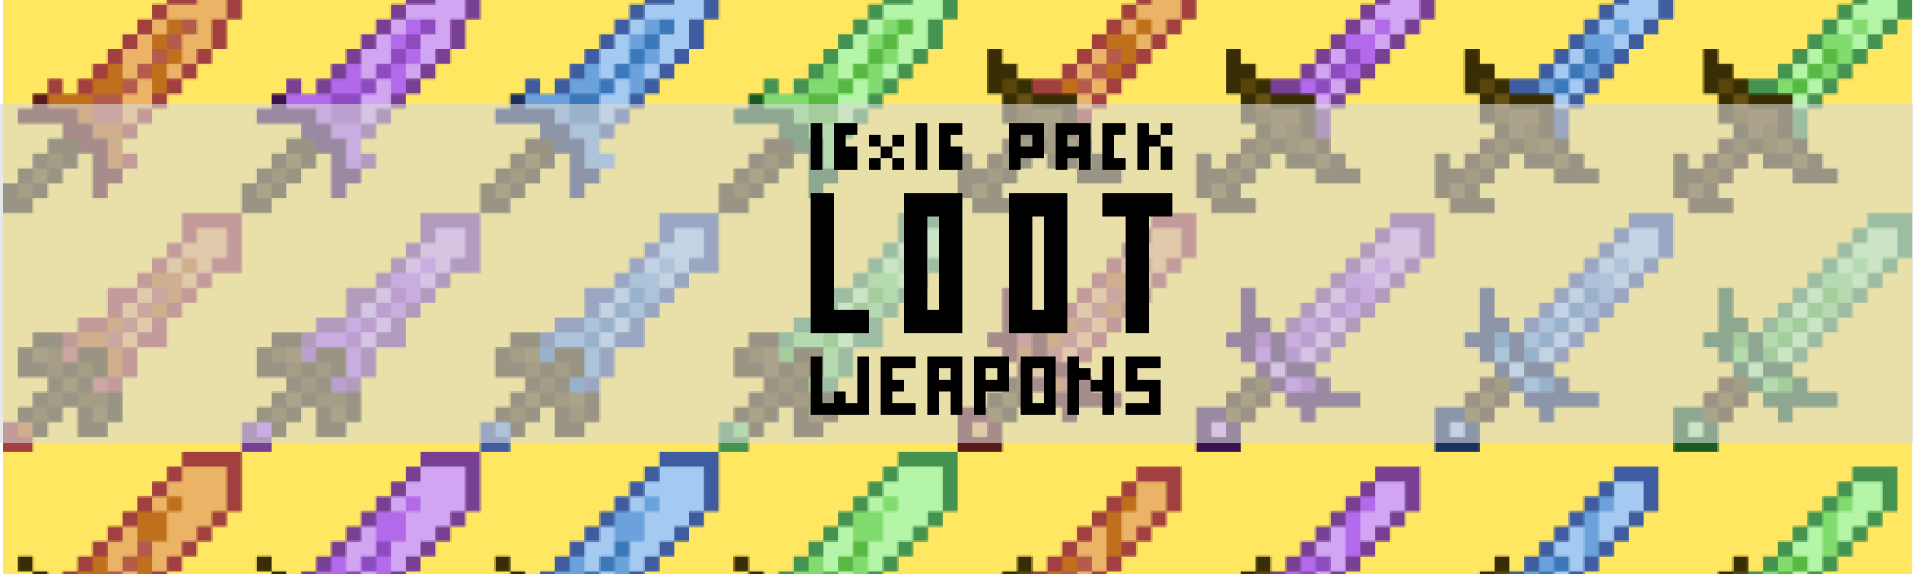 Loot Weapons 16x16 Pack